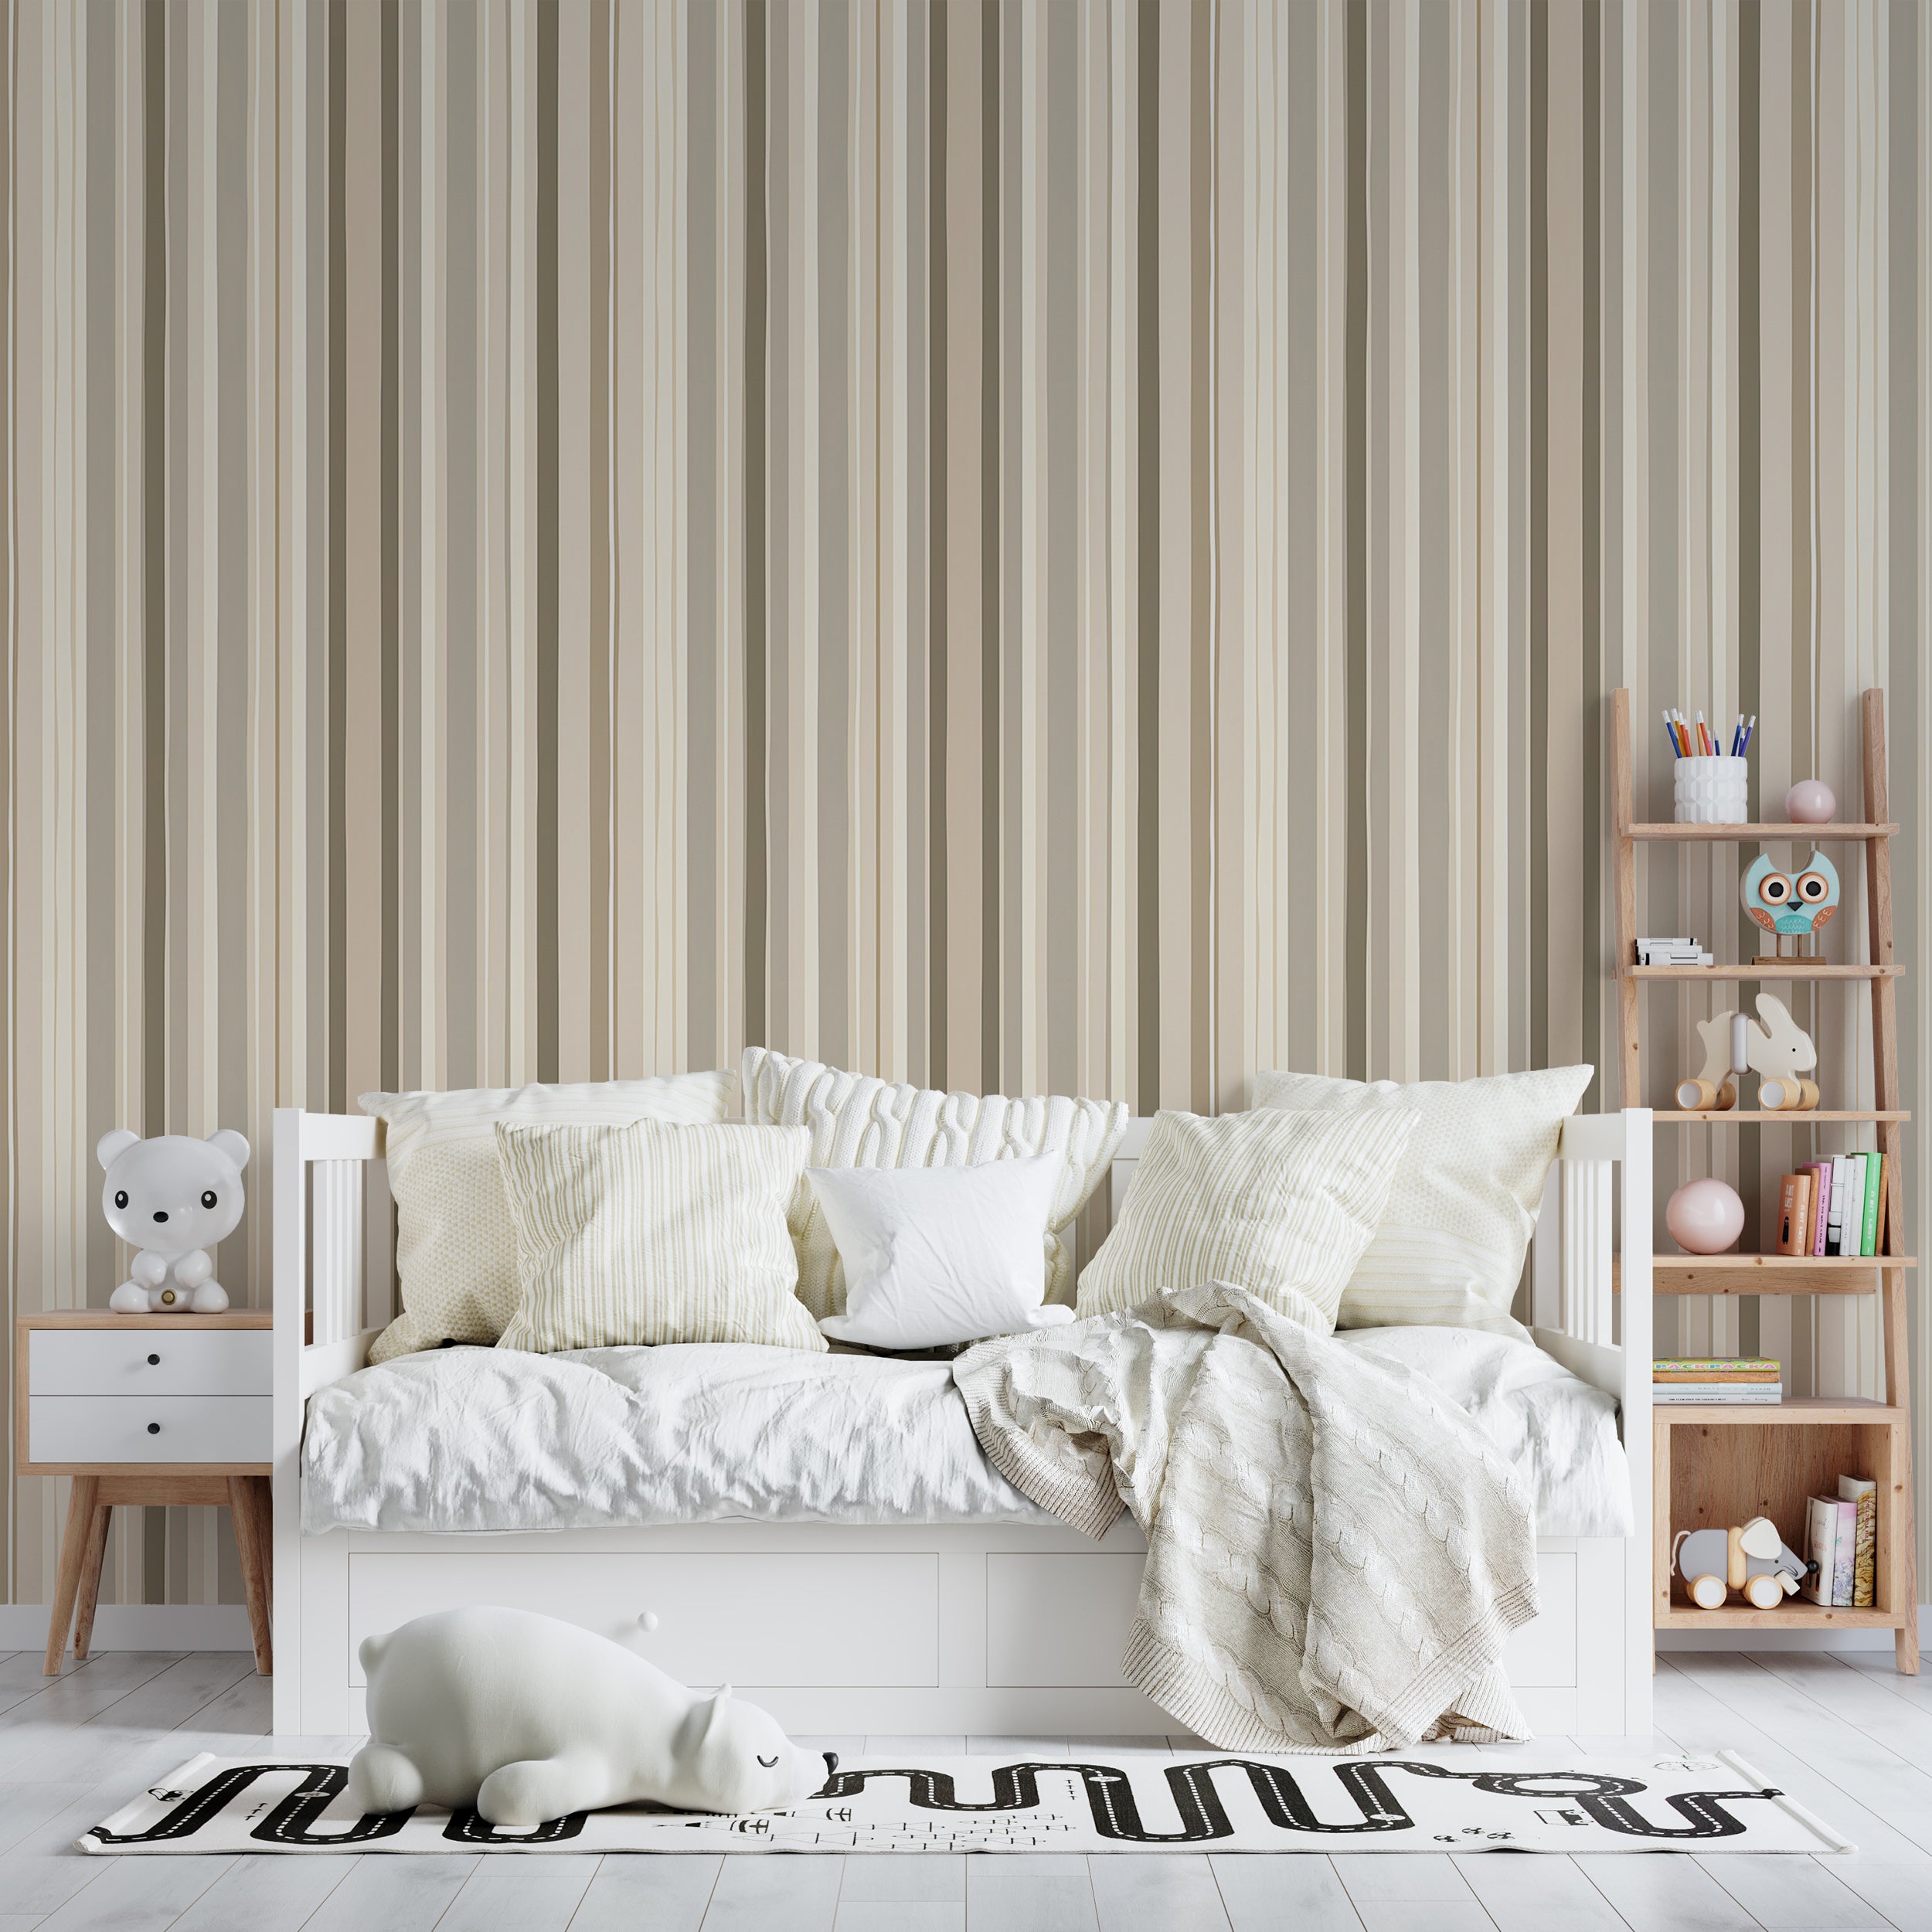 Beige Striped Peel and Stick Wallpaper Vertical Stripes Removable Wallpaper